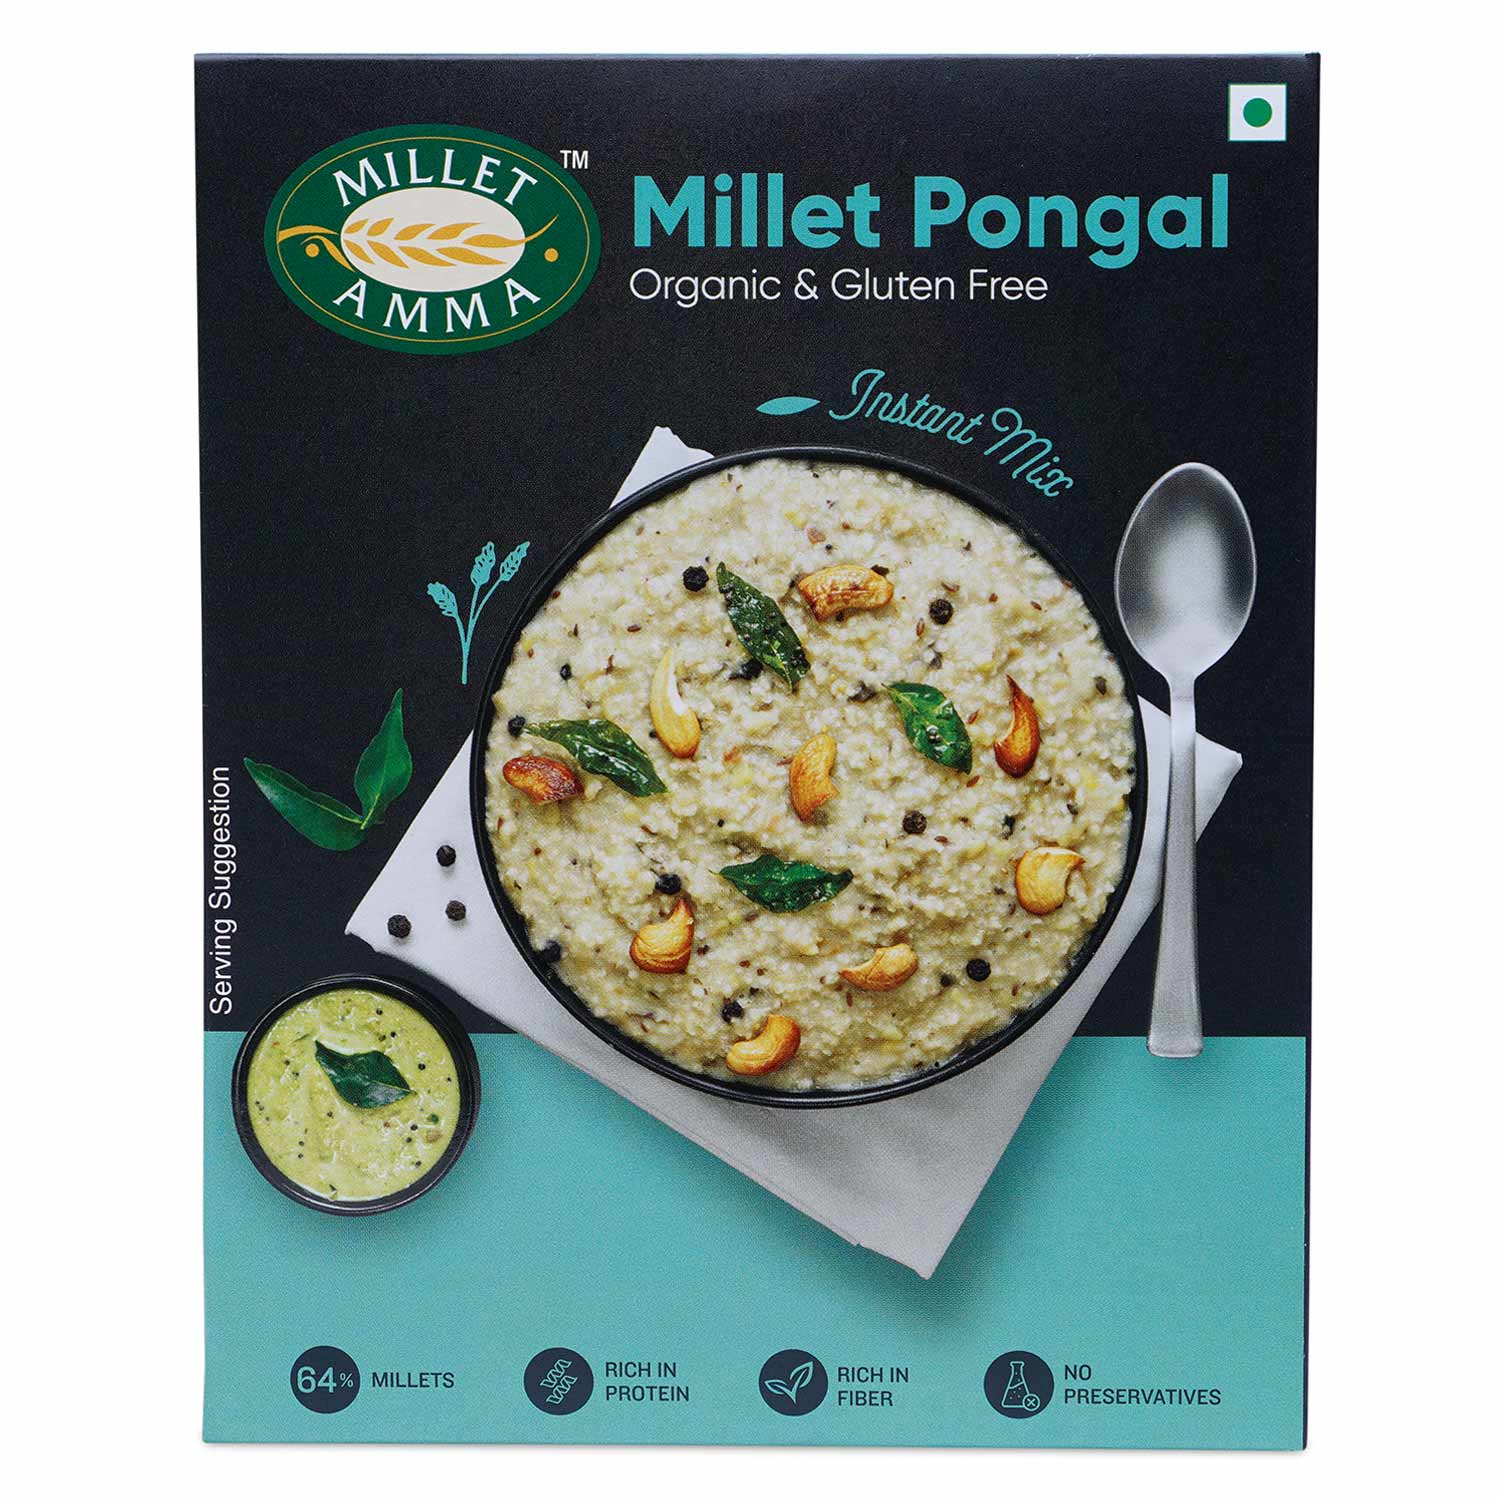 Millet Amma Millet Pongal Mix - buy in USA, Australia, Canada